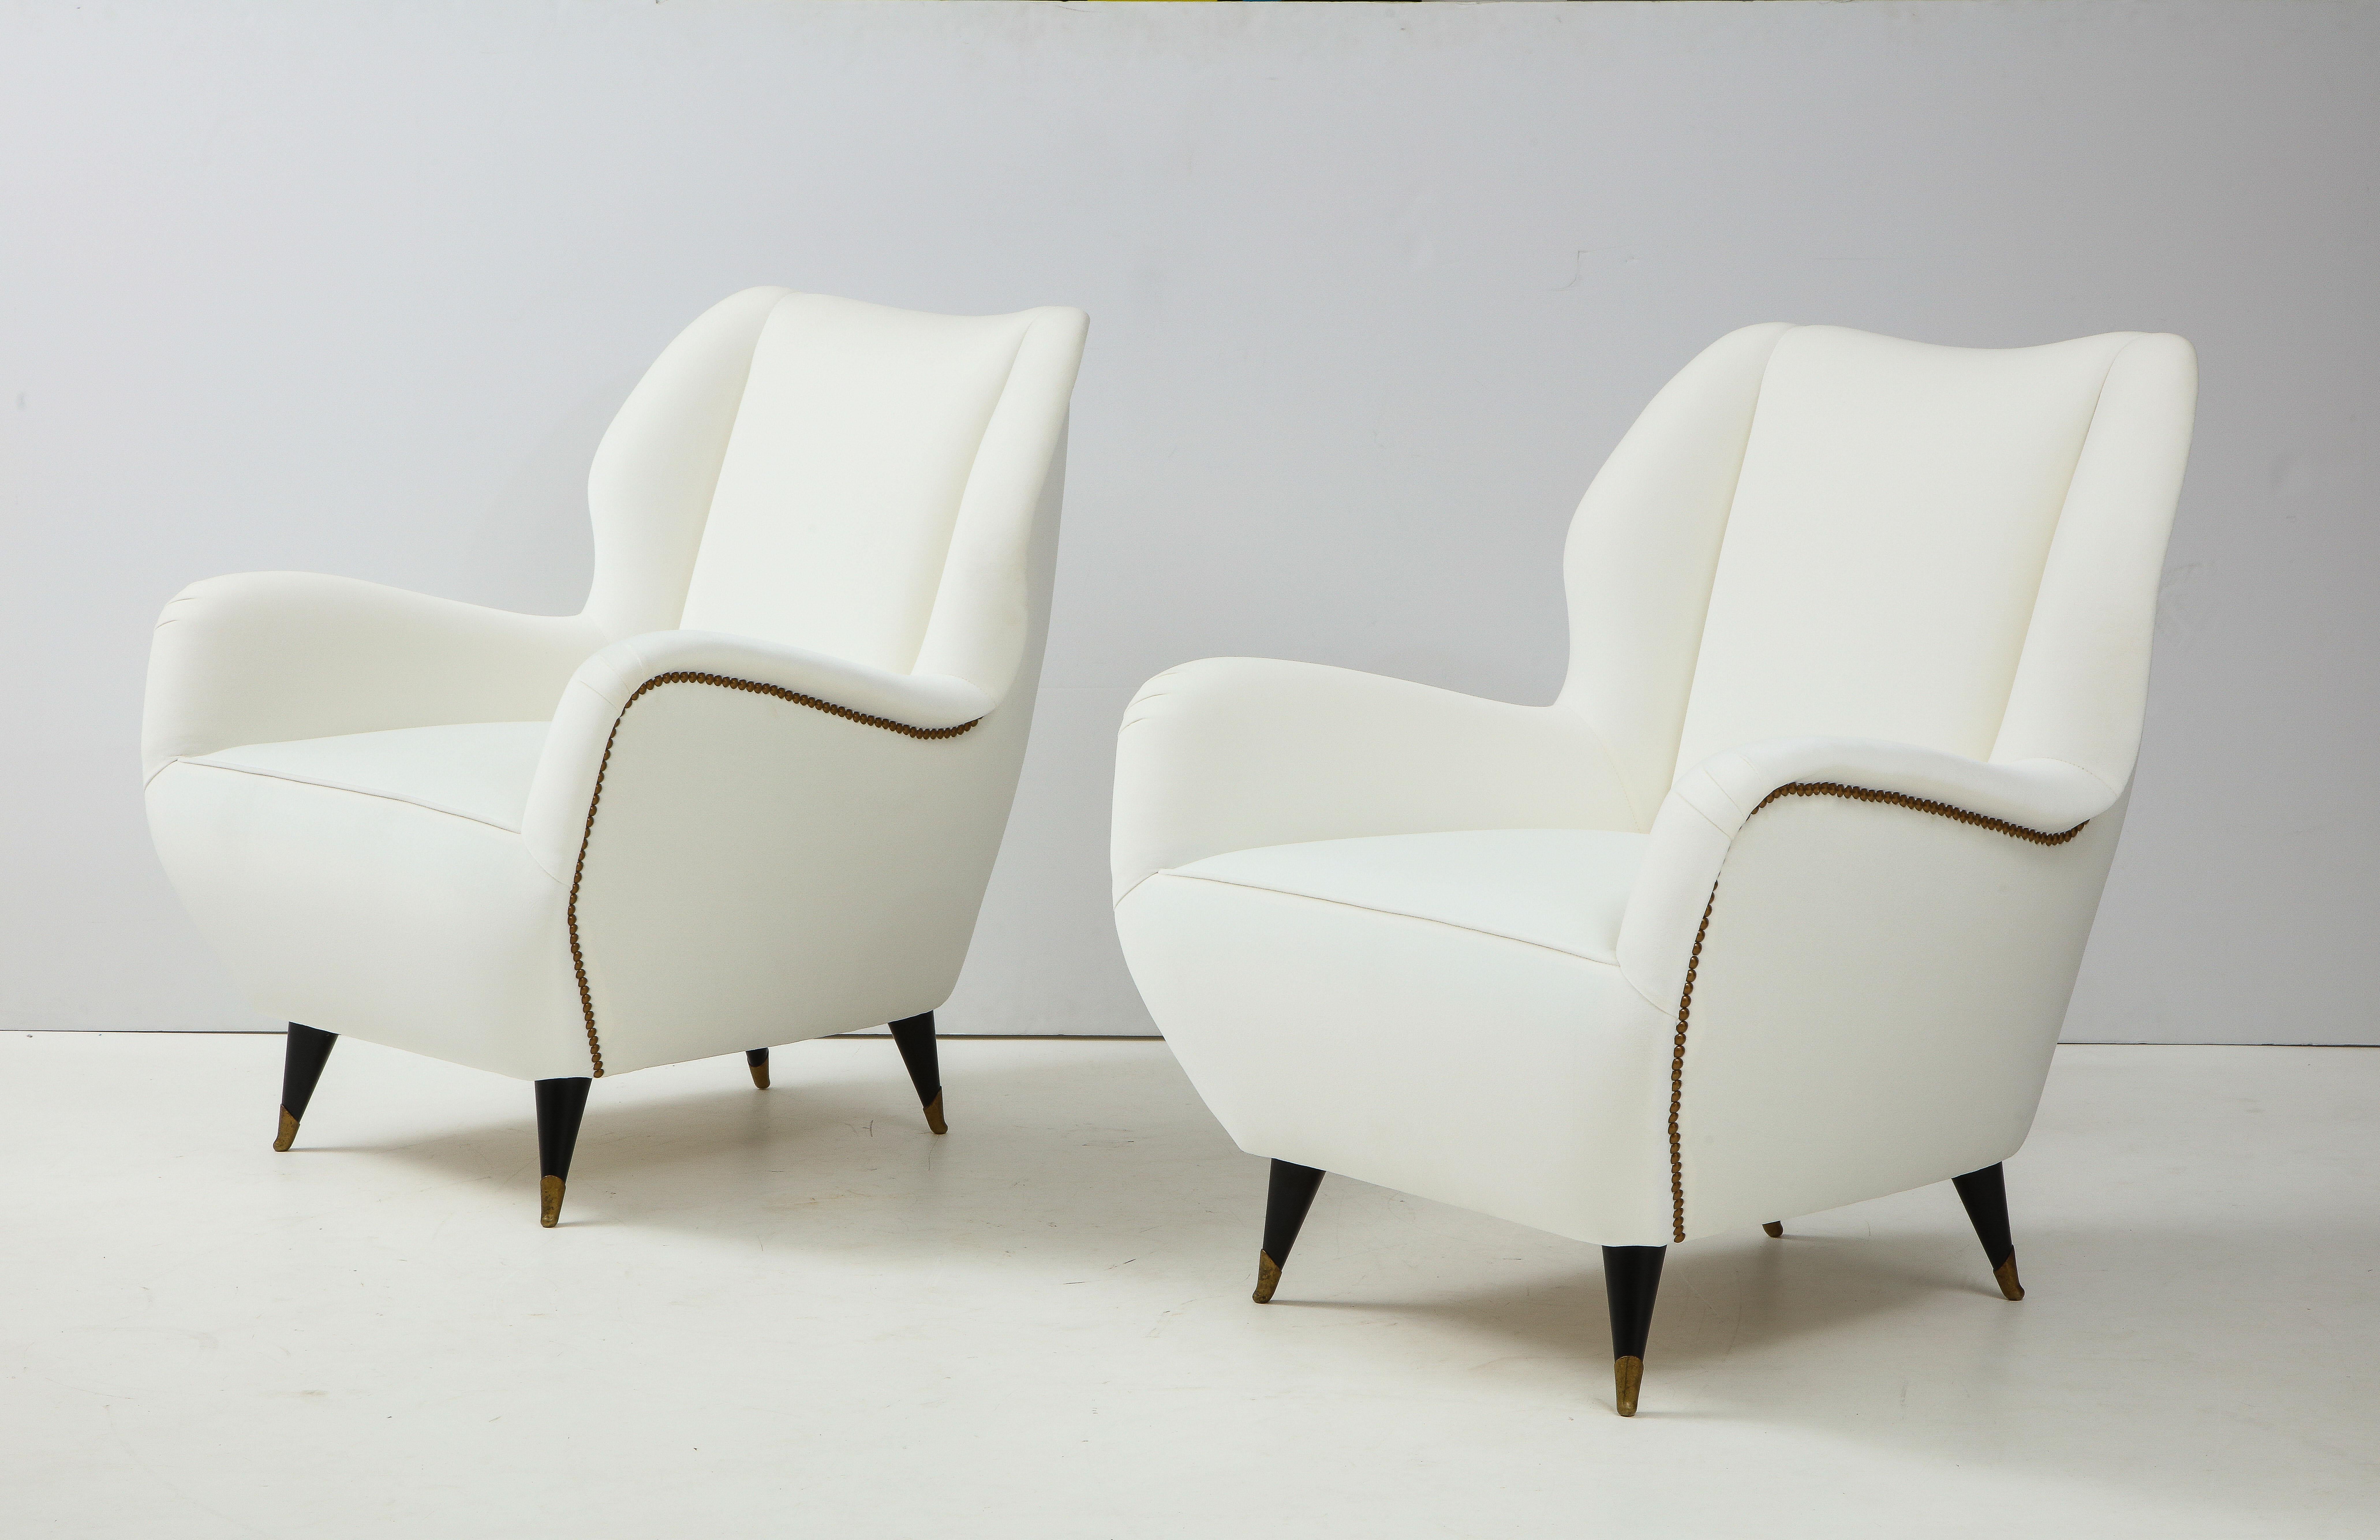 Pair of Sculptural Italian Vintage Lounge Chairs, Attributed to Gio Ponti For Sale 2